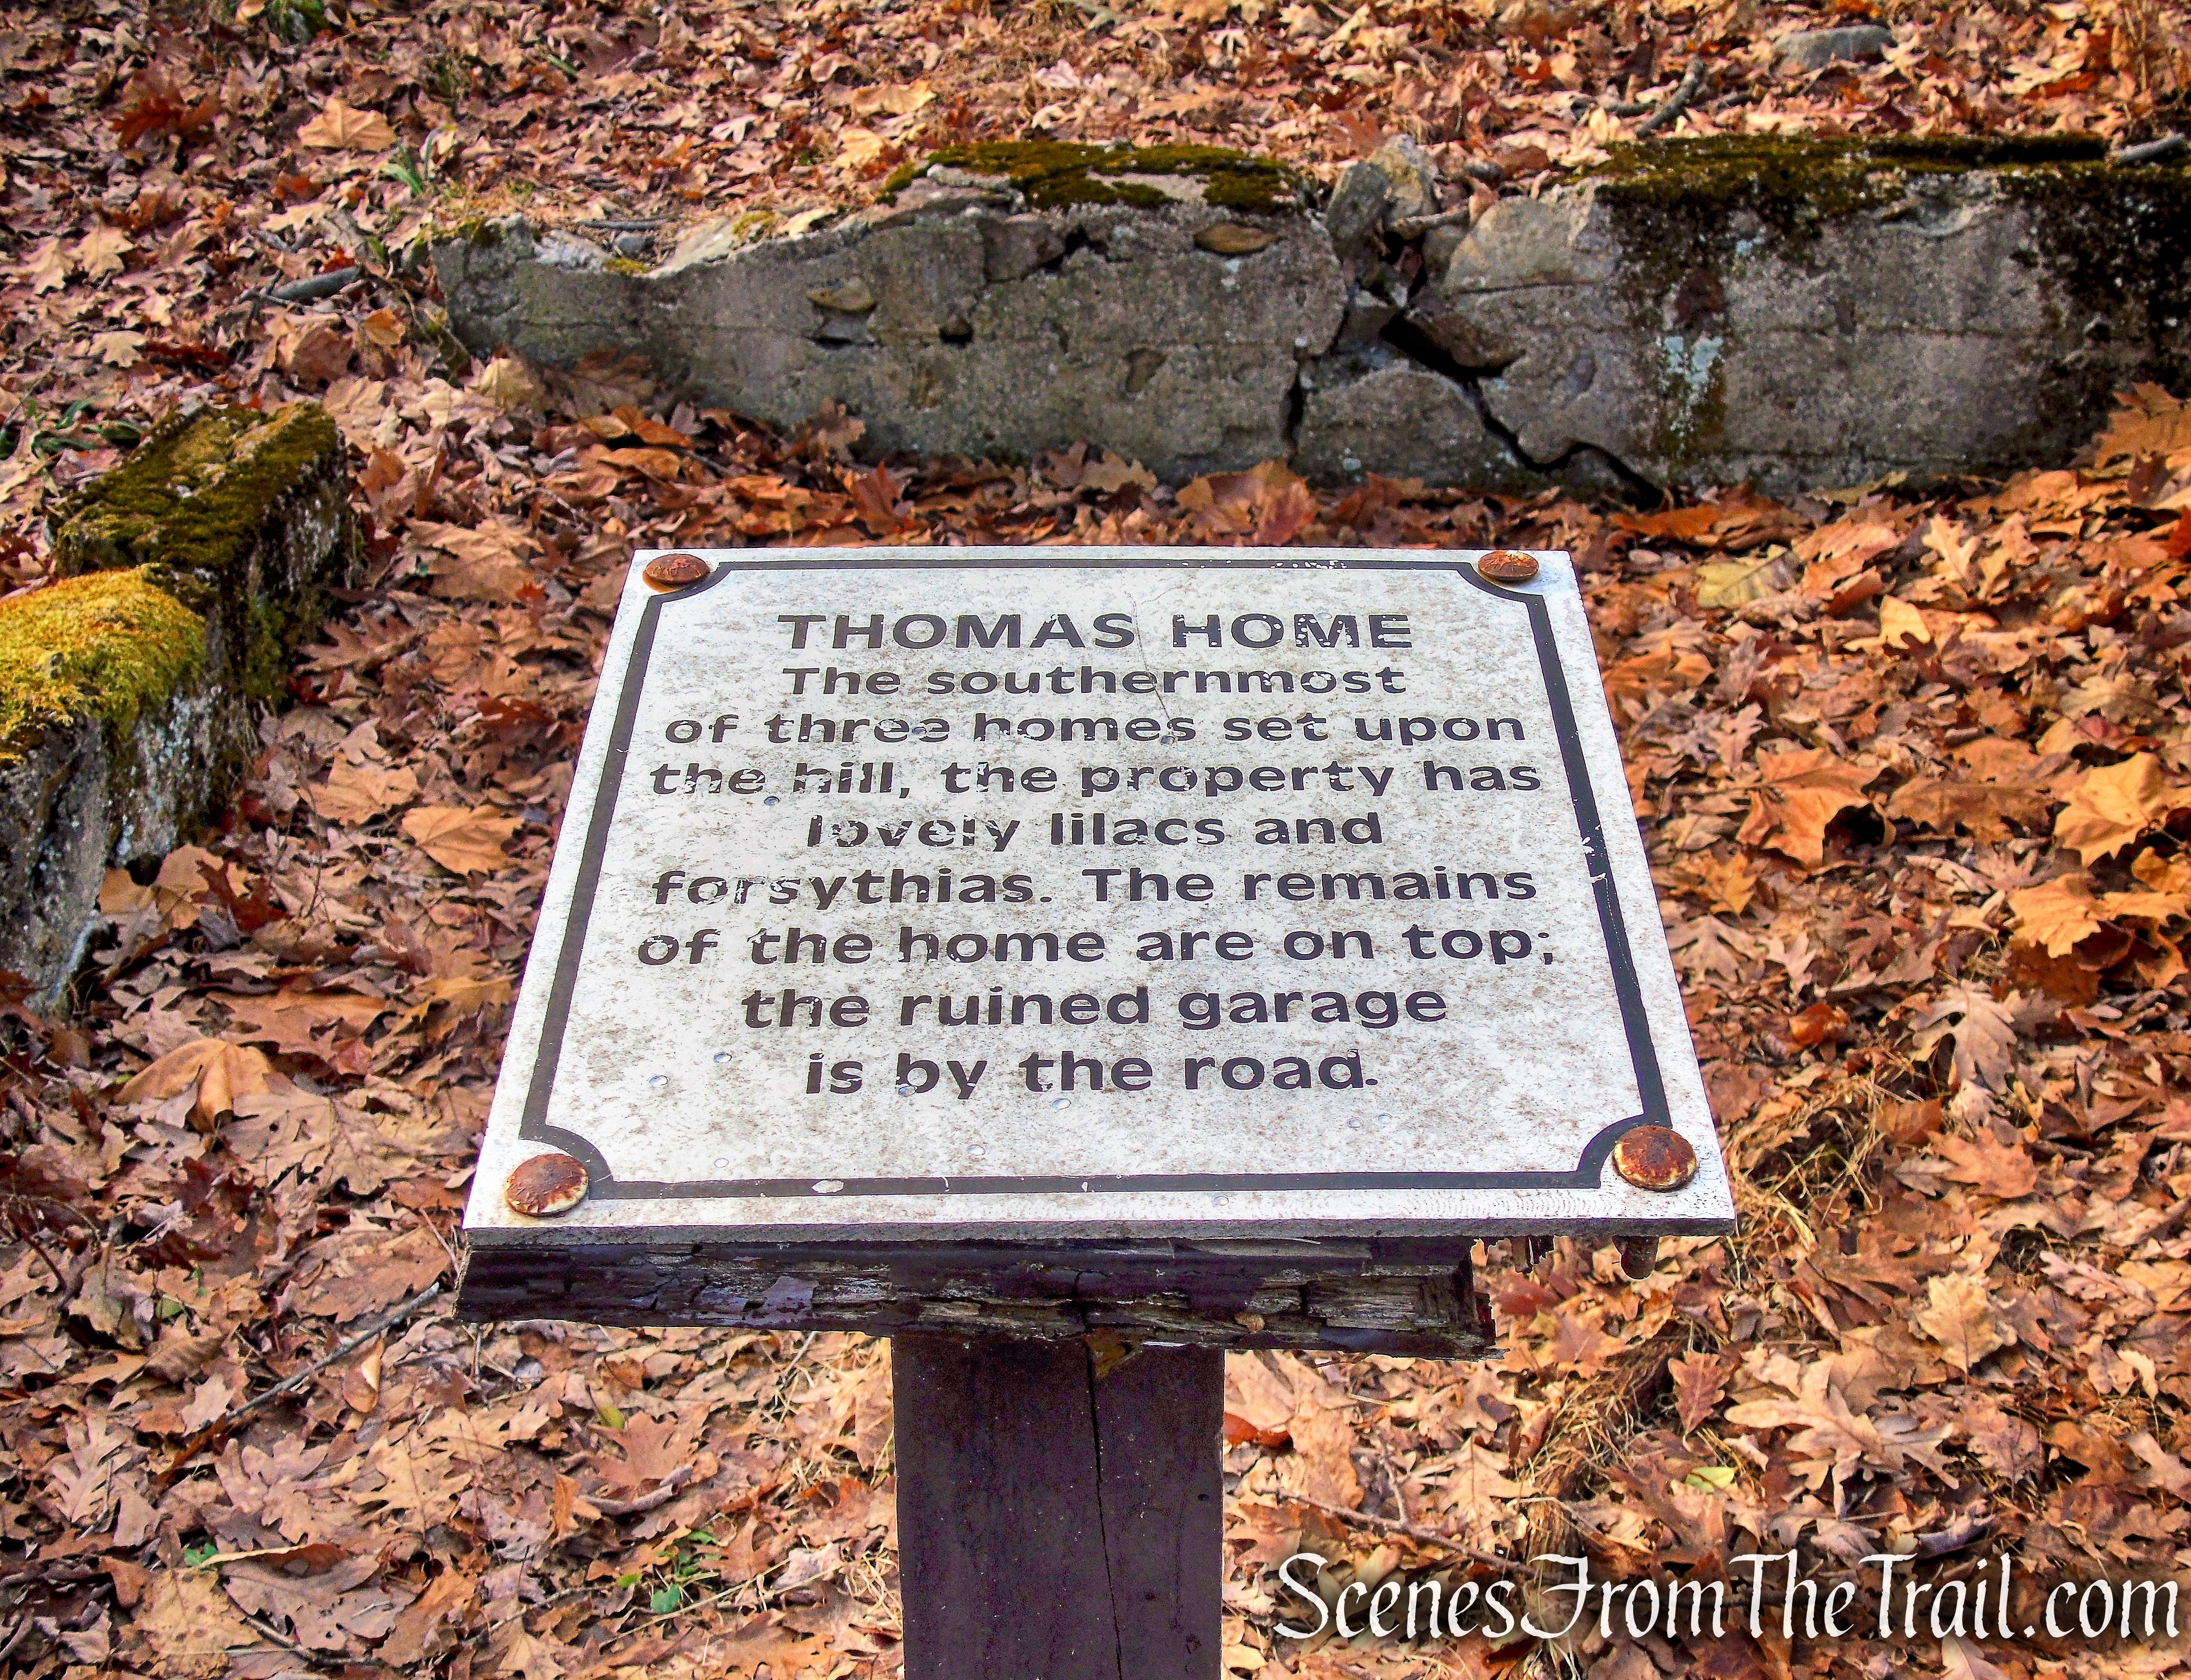 site of the Thomas home - Doodletown